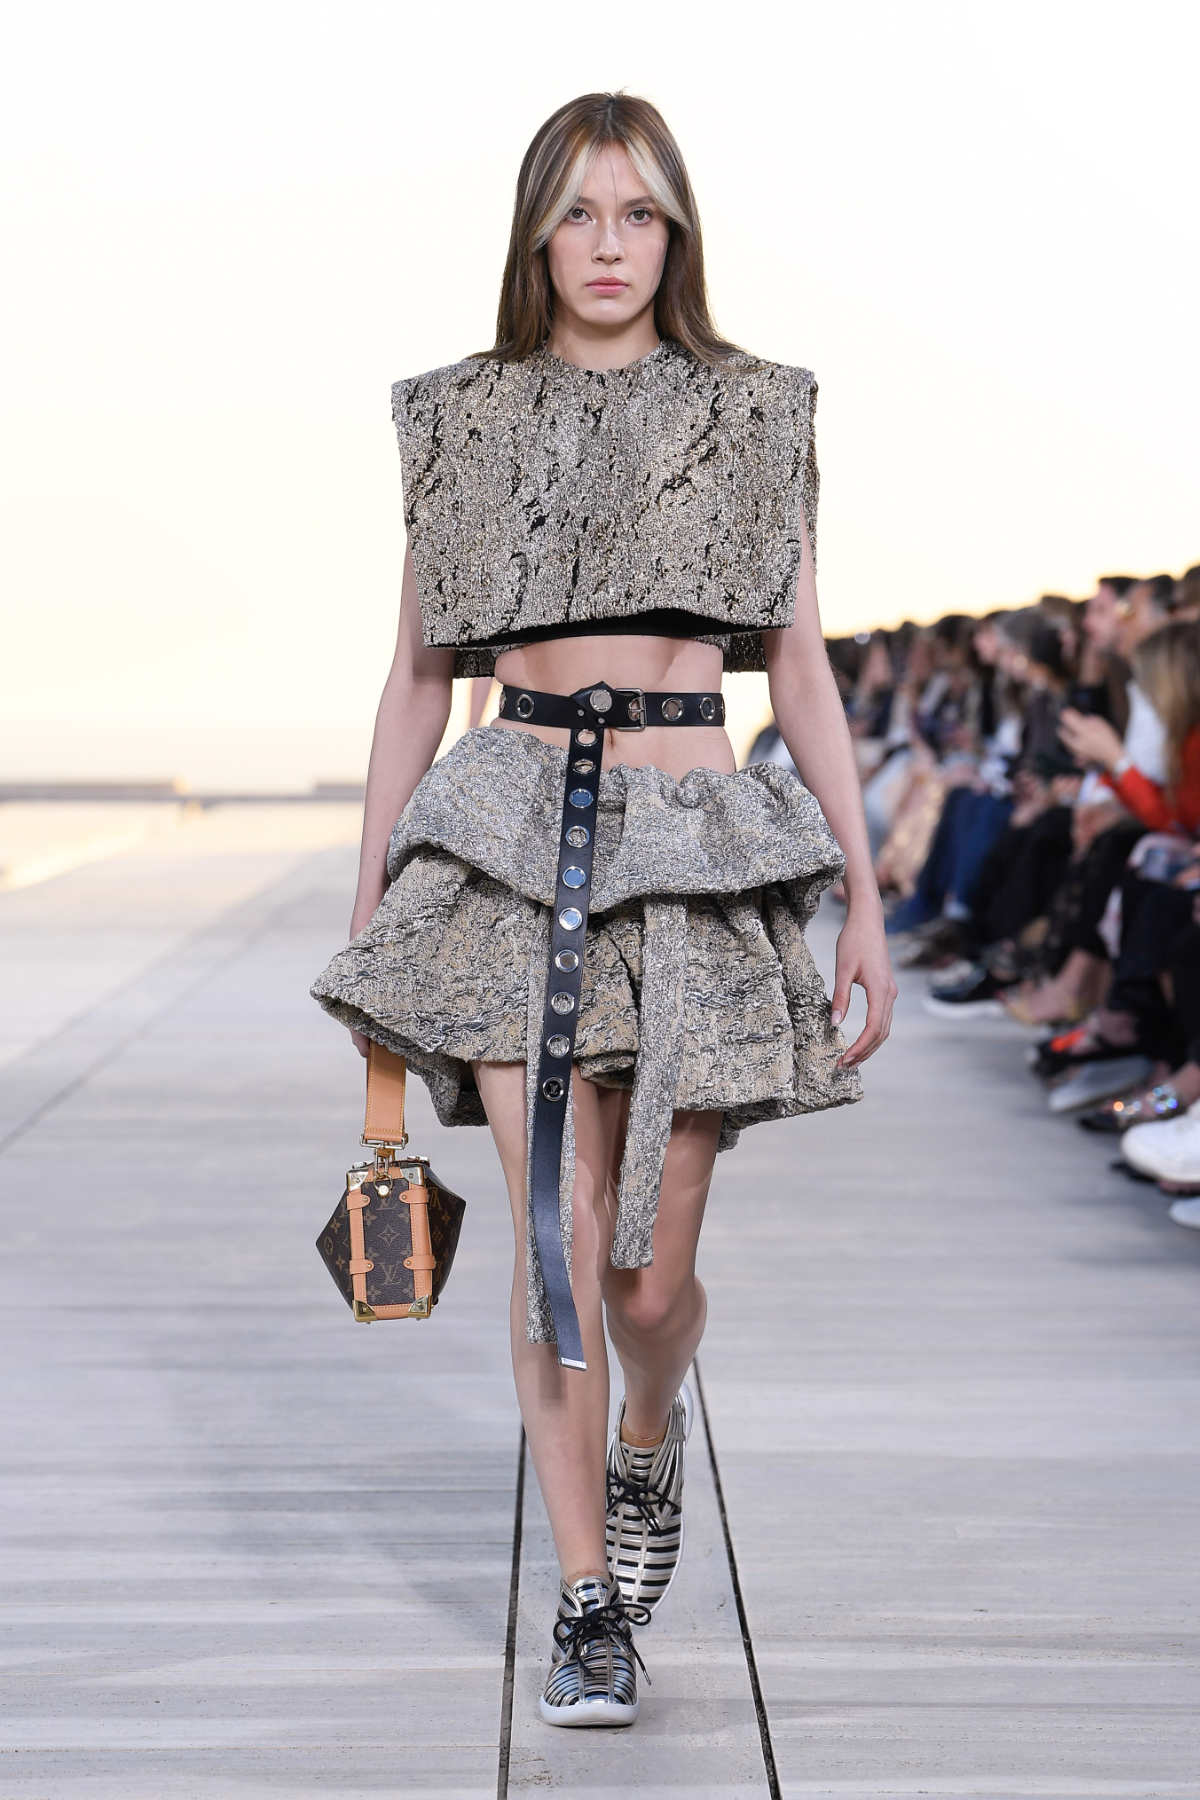 Louis Vuitton Presents Its New Cruise 2023 Women's Fashion Show Collection